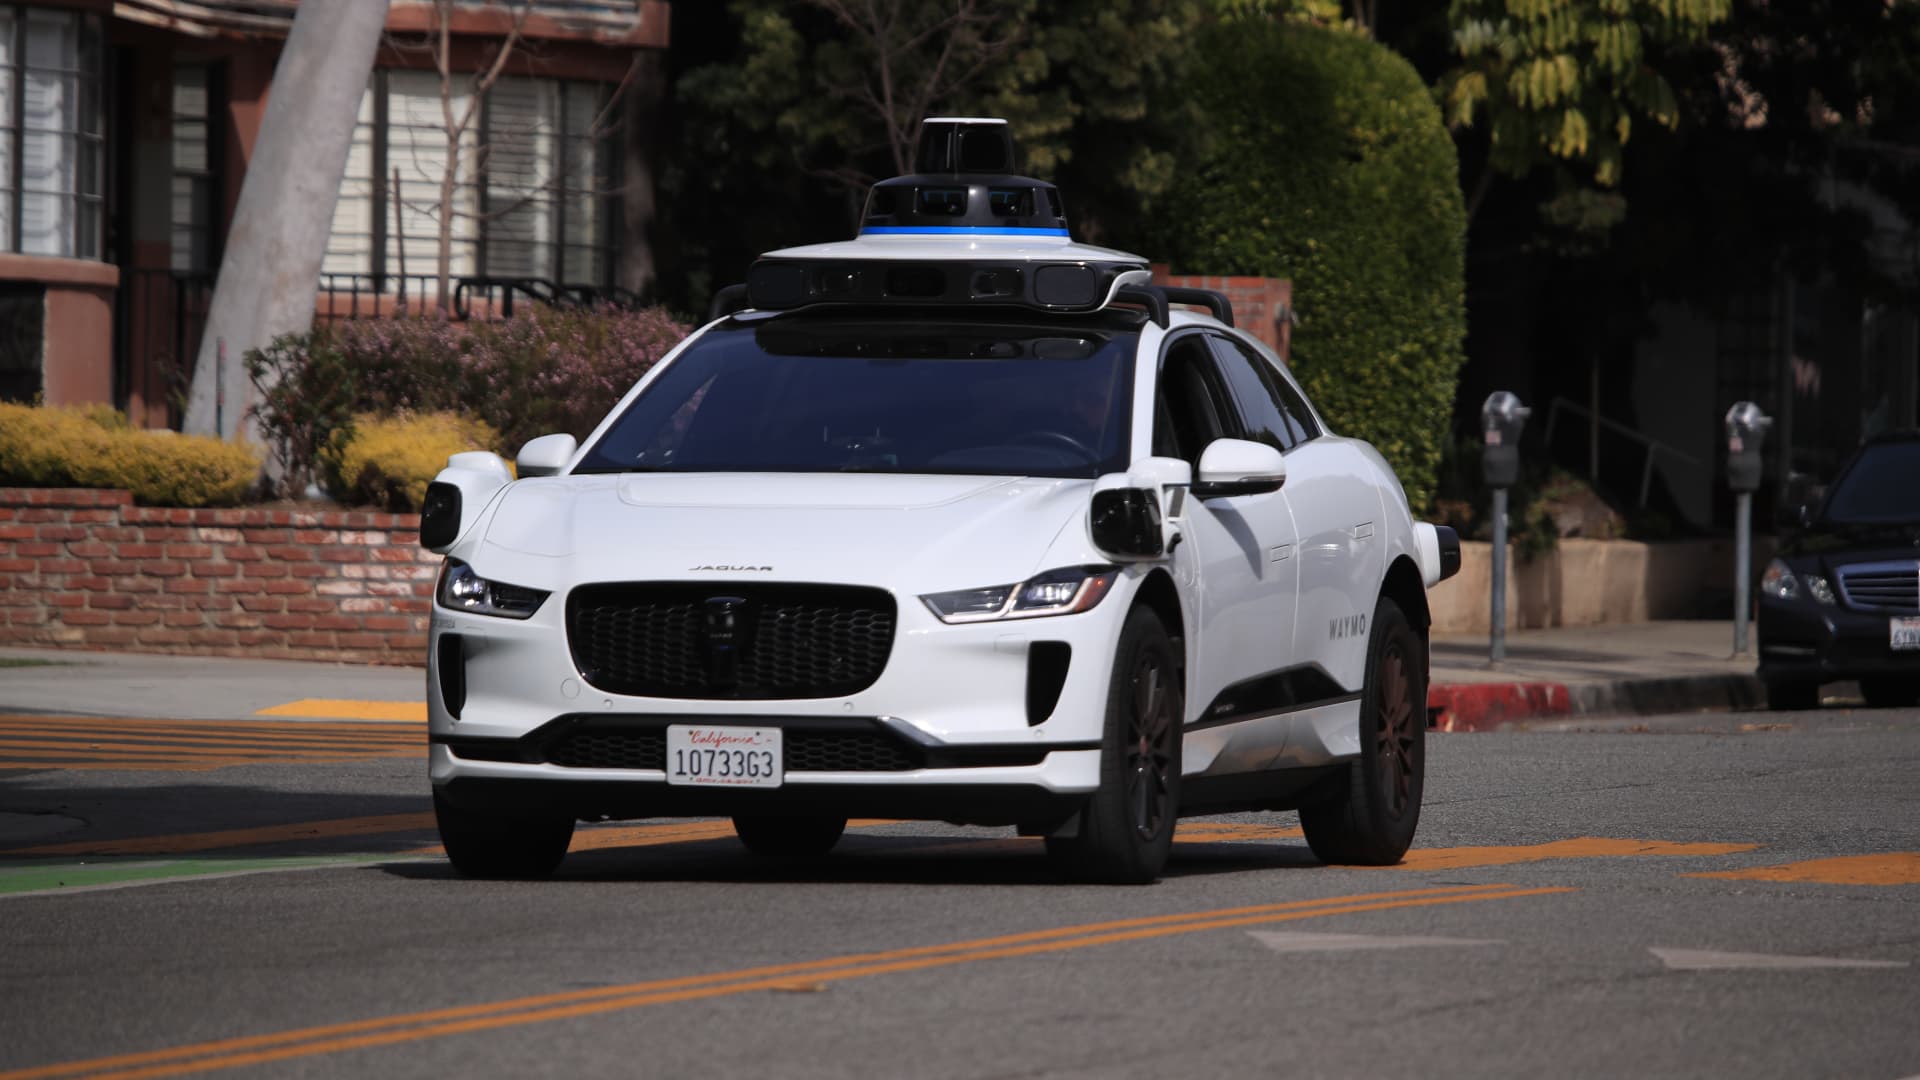 Uber to offer autonomous ride-hailing and delivery services using Waymo’s robotaxis